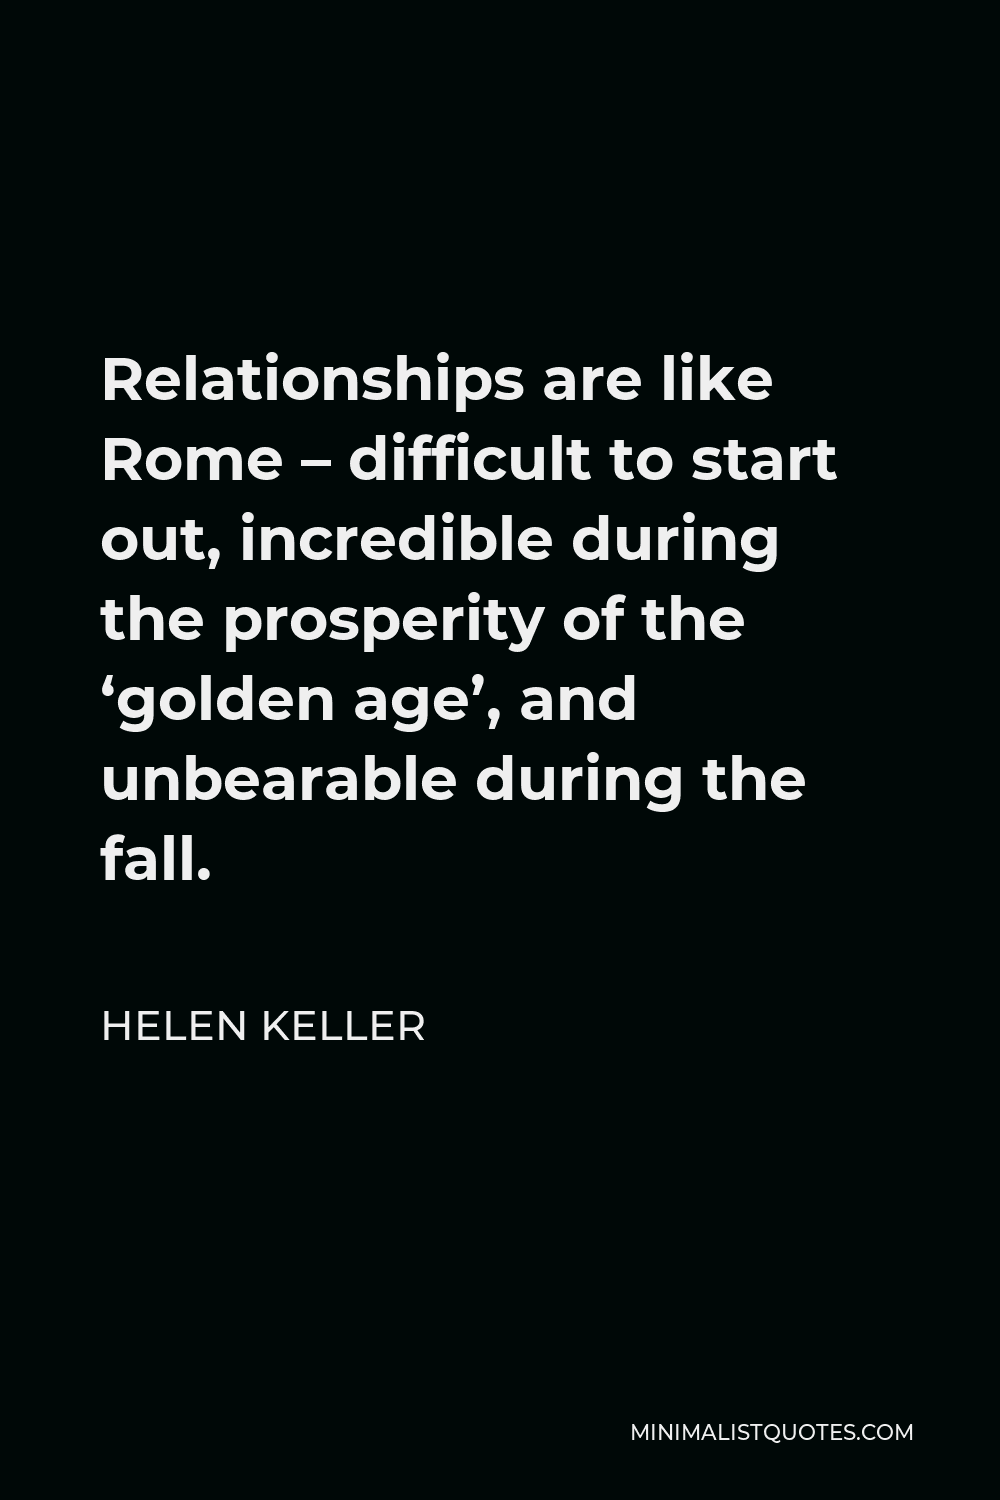 Helen Keller Quote - Relationships are like Rome – difficult to start out, incredible during the prosperity of the ‘golden age’, and unbearable during the fall.